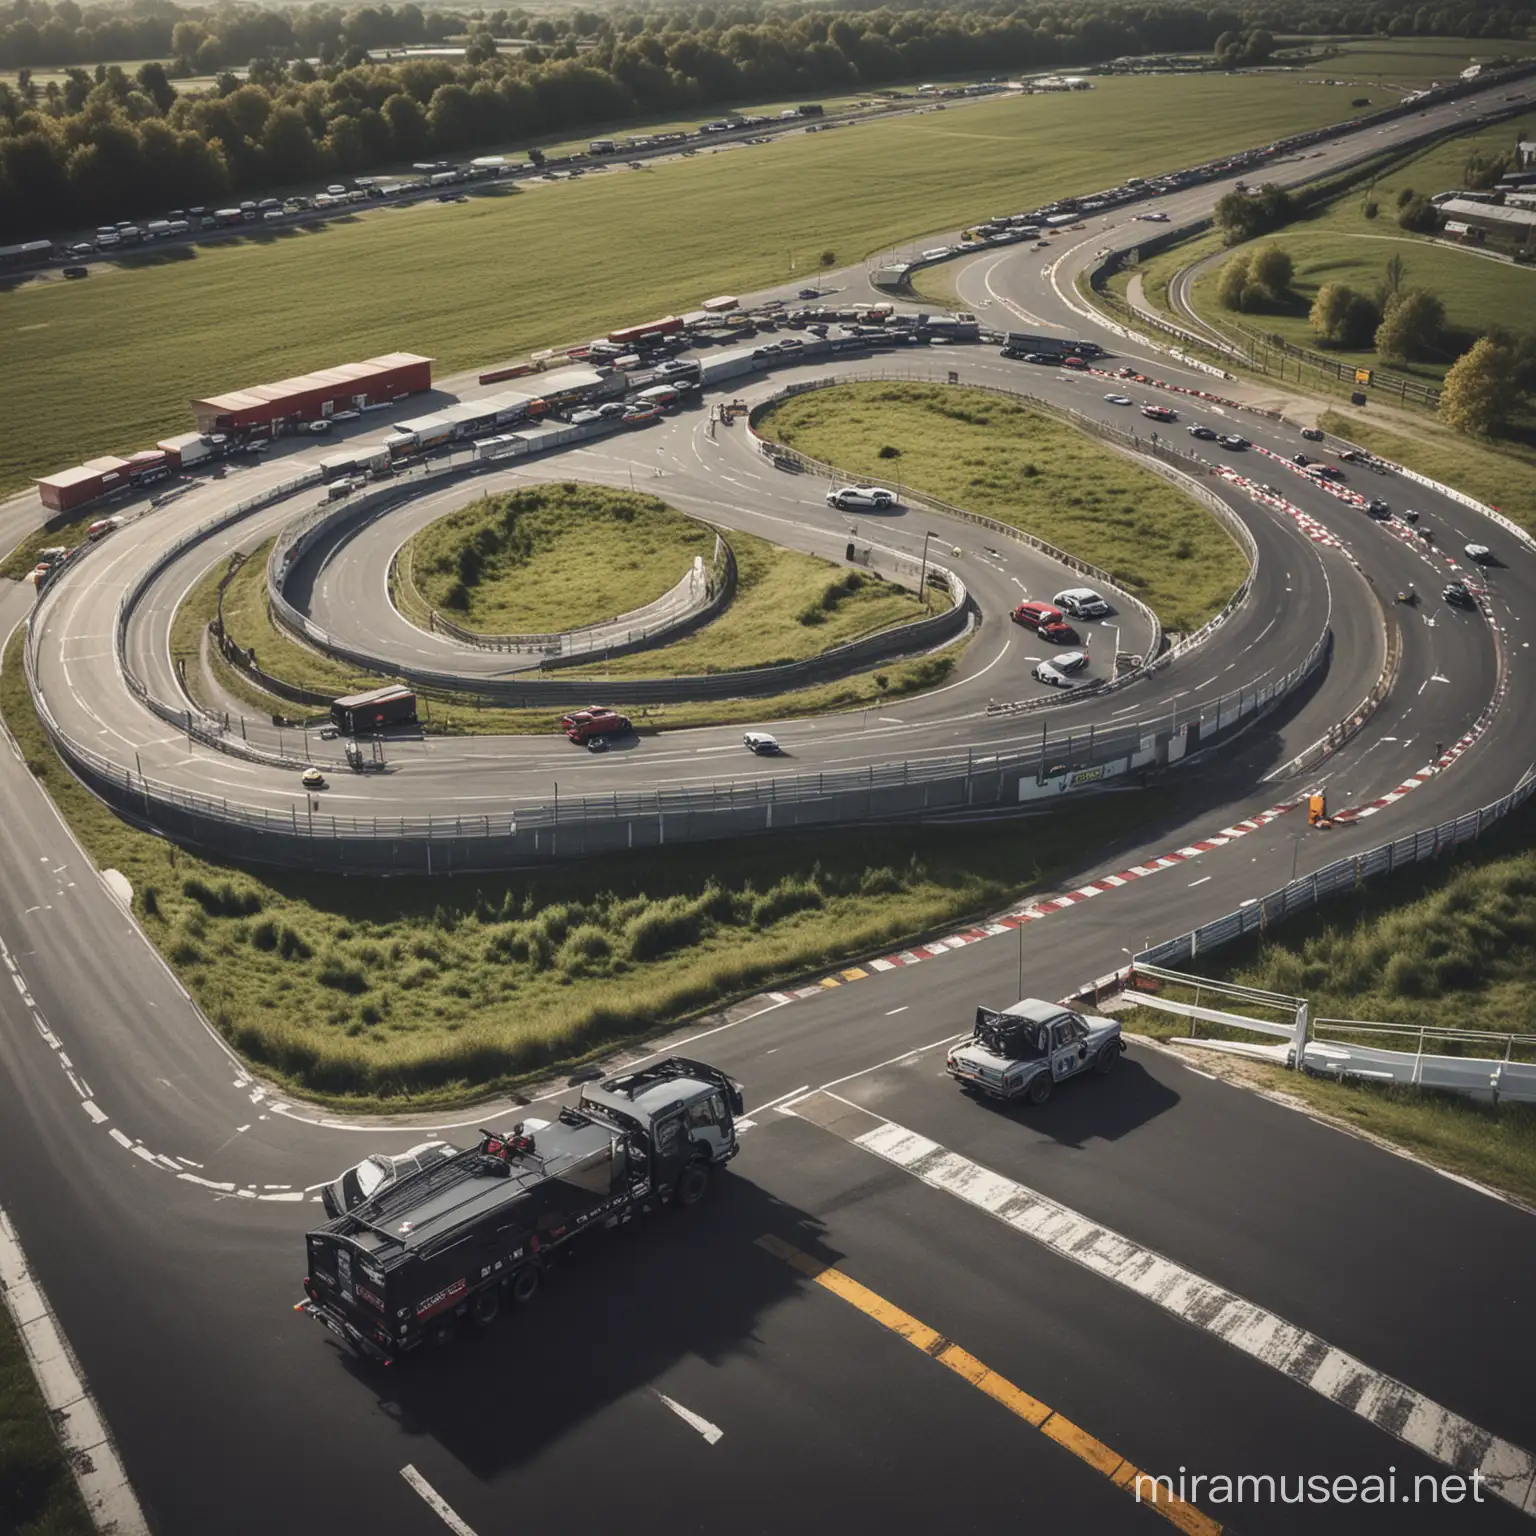 Exciting Racing Driving Course Experience